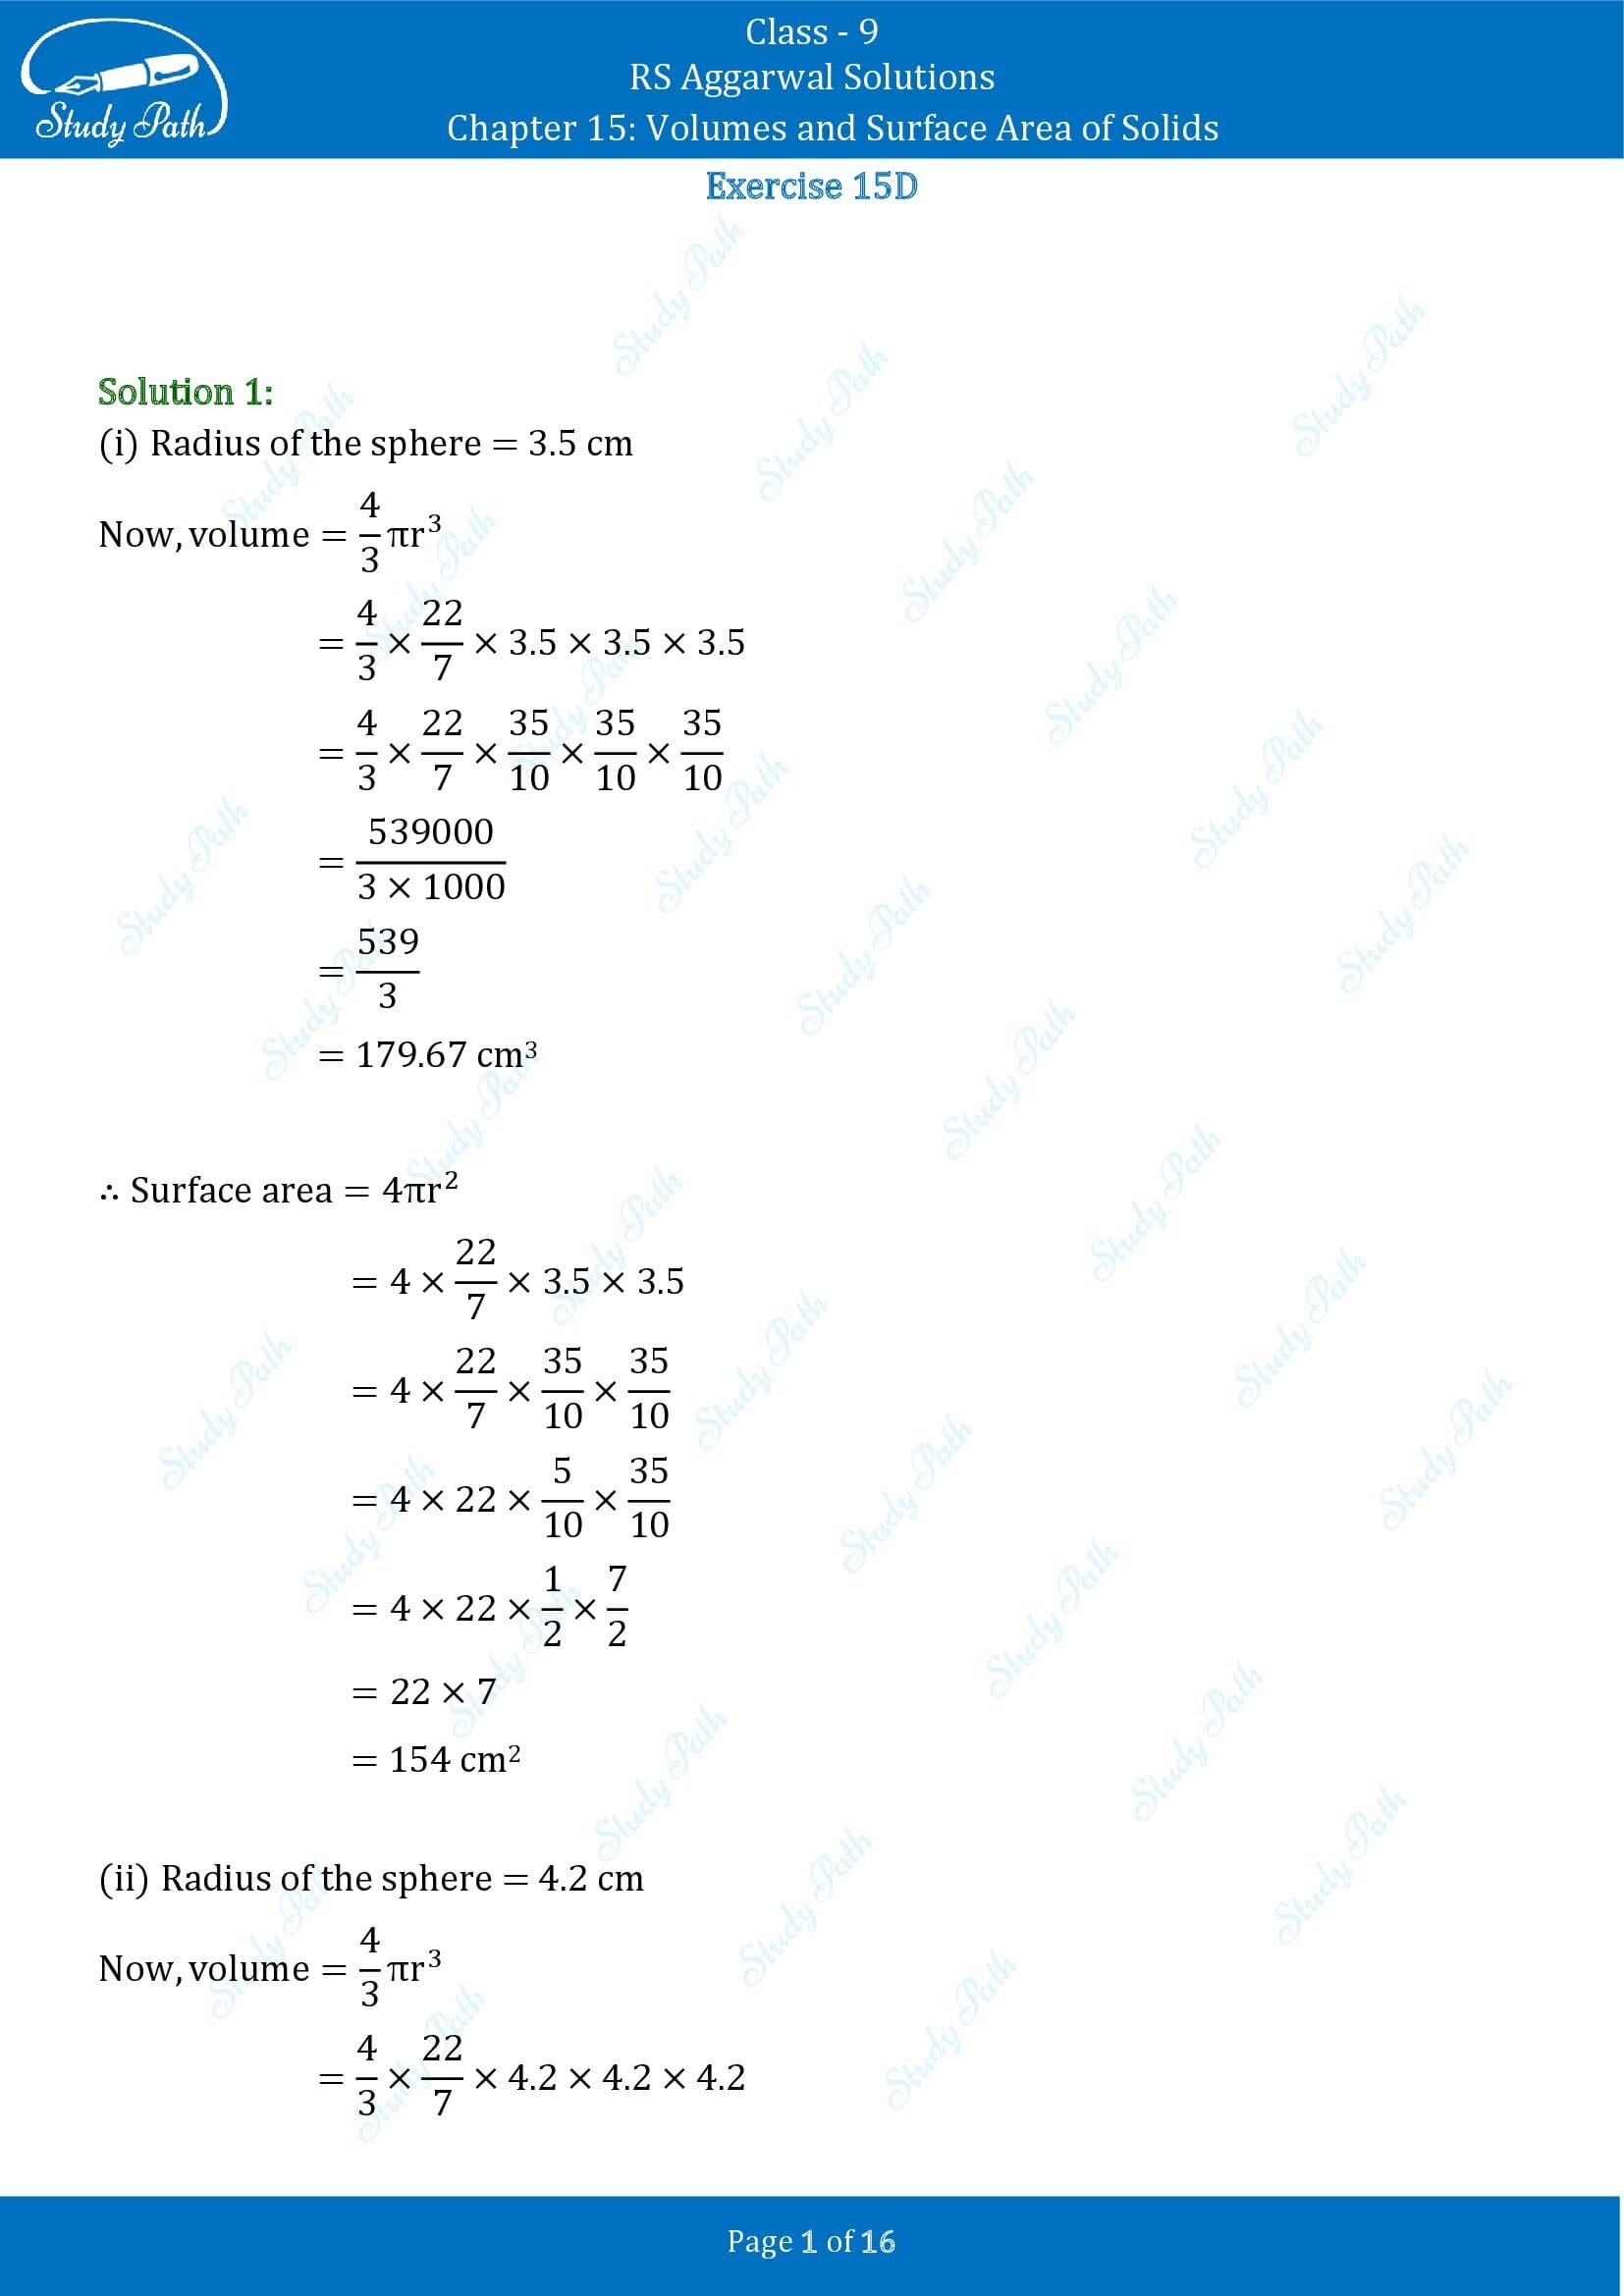 RS Aggarwal Solutions Class 9 Chapter 15 Volumes and Surface Area of Solids Exercise 15D 00001